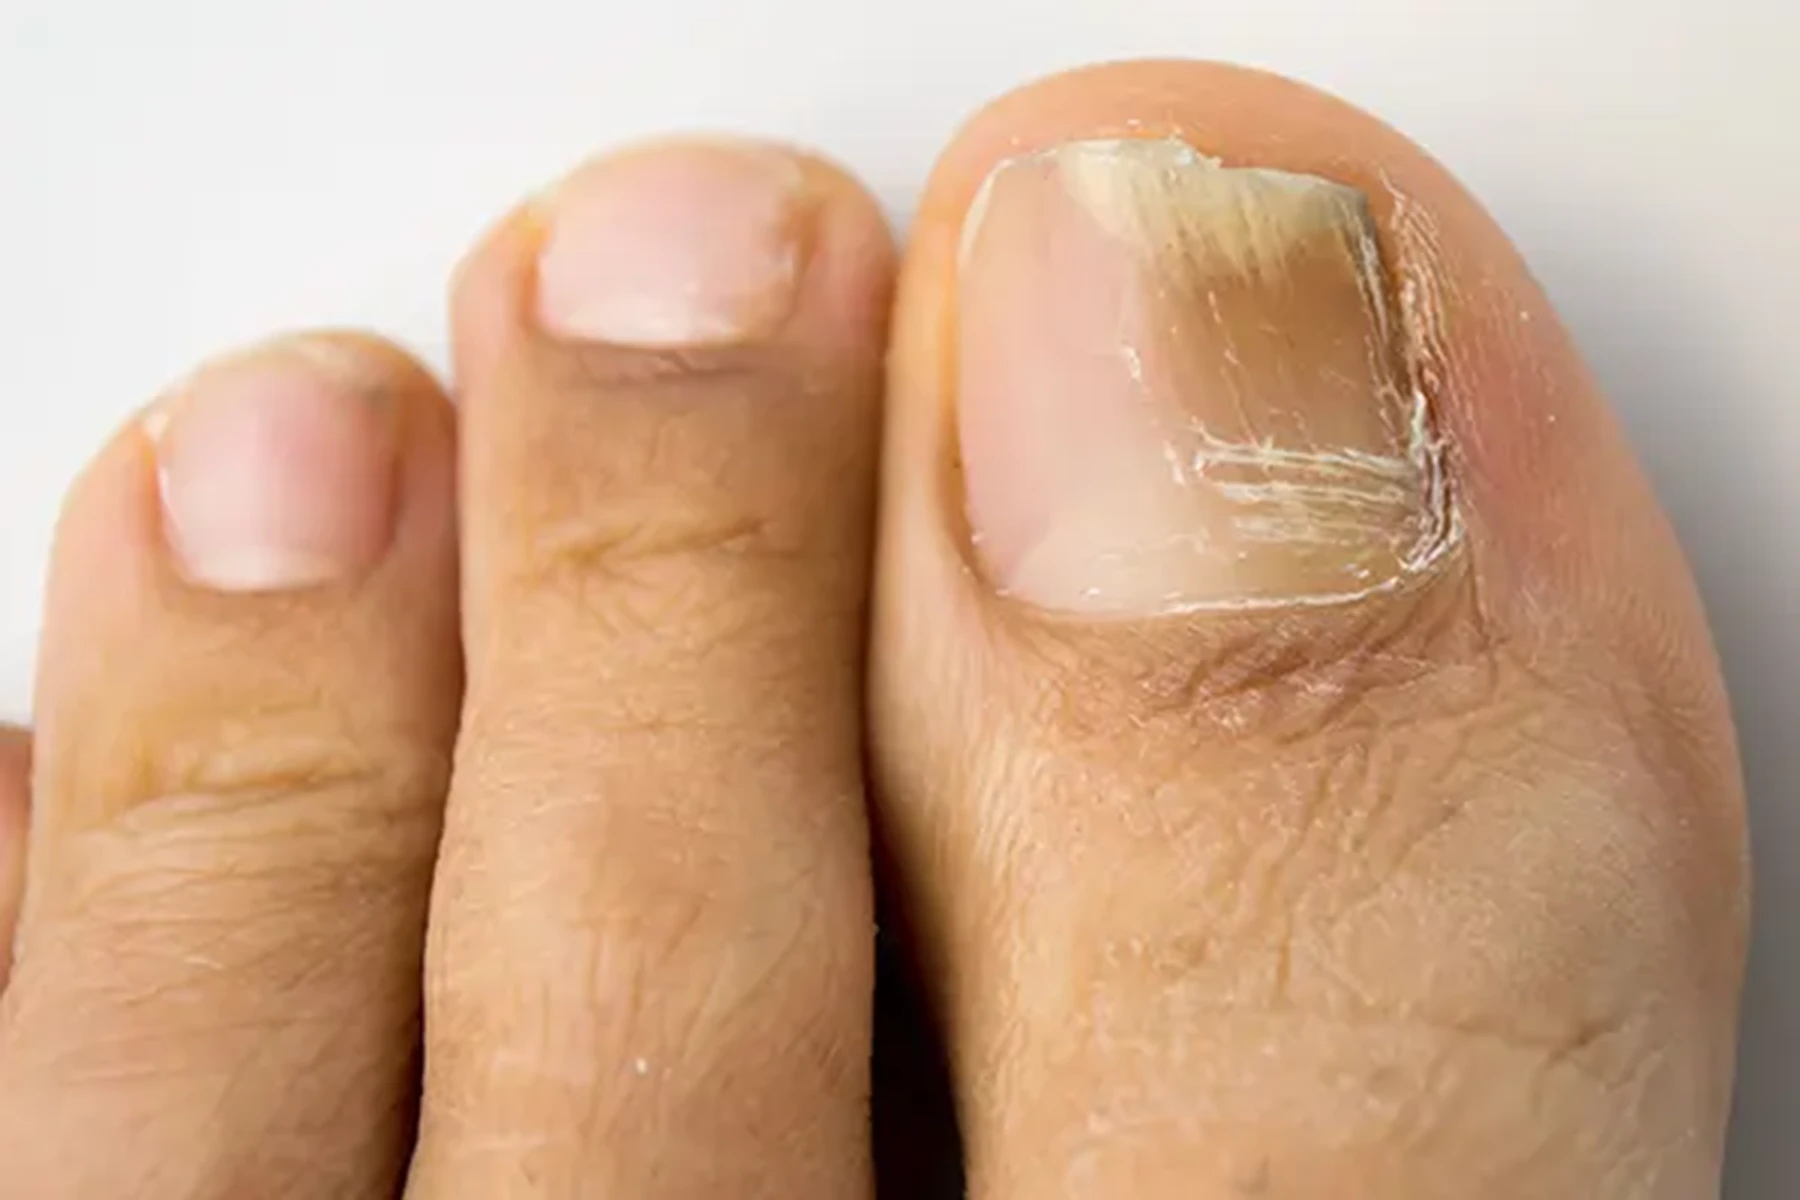 Causes and Treatments of Toenail Fungus